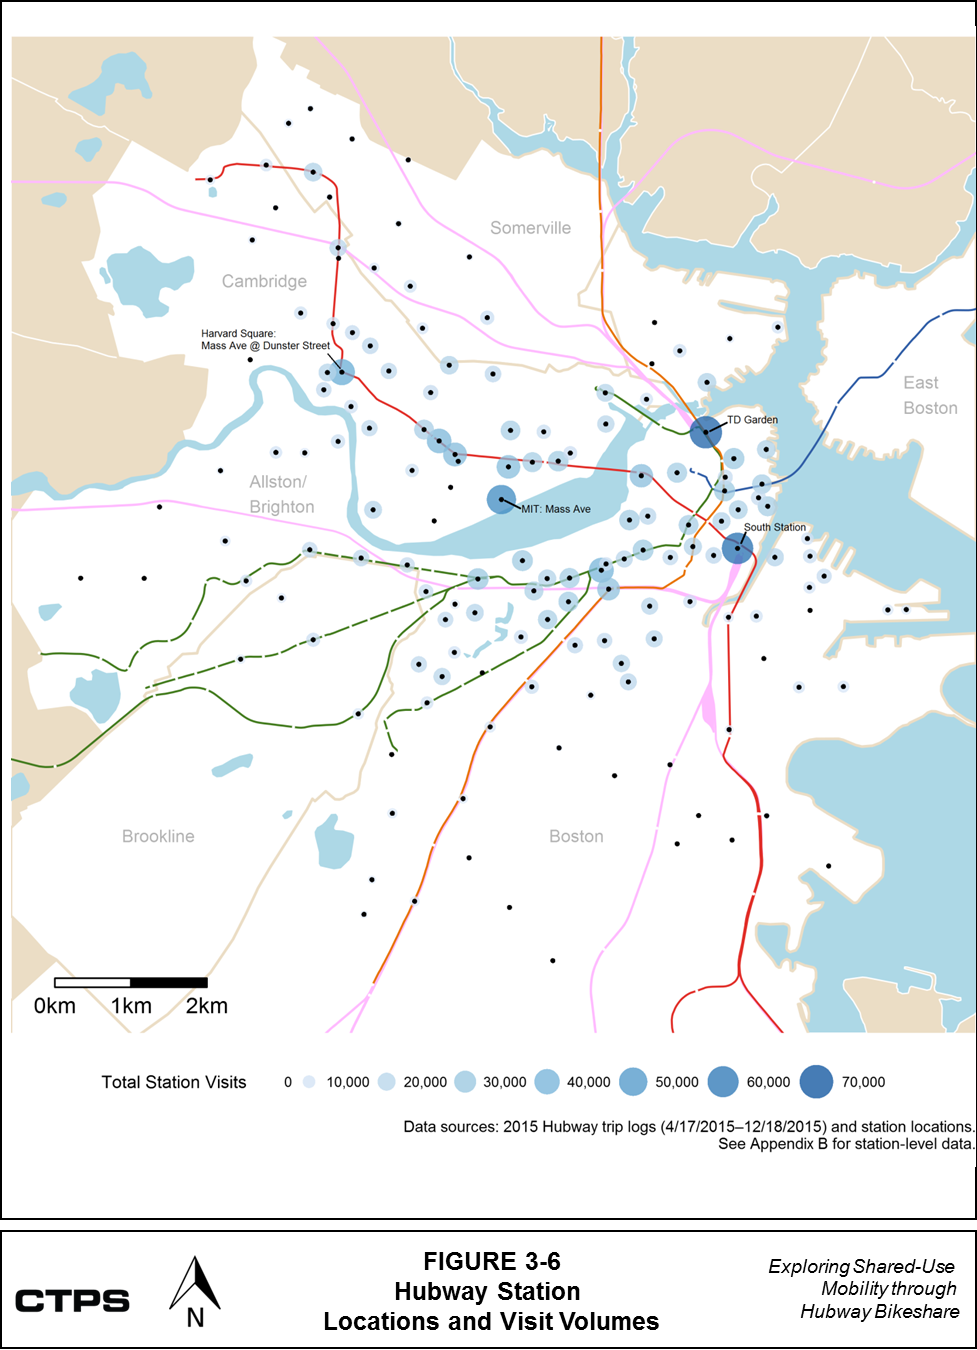 FIGURE 3-6: Hubway Station Location and Visit Volumes: This map shows the locations of Hubway stations and classifies them by visit volumes for the period from April 17, 2015 to December 18, 2015. 